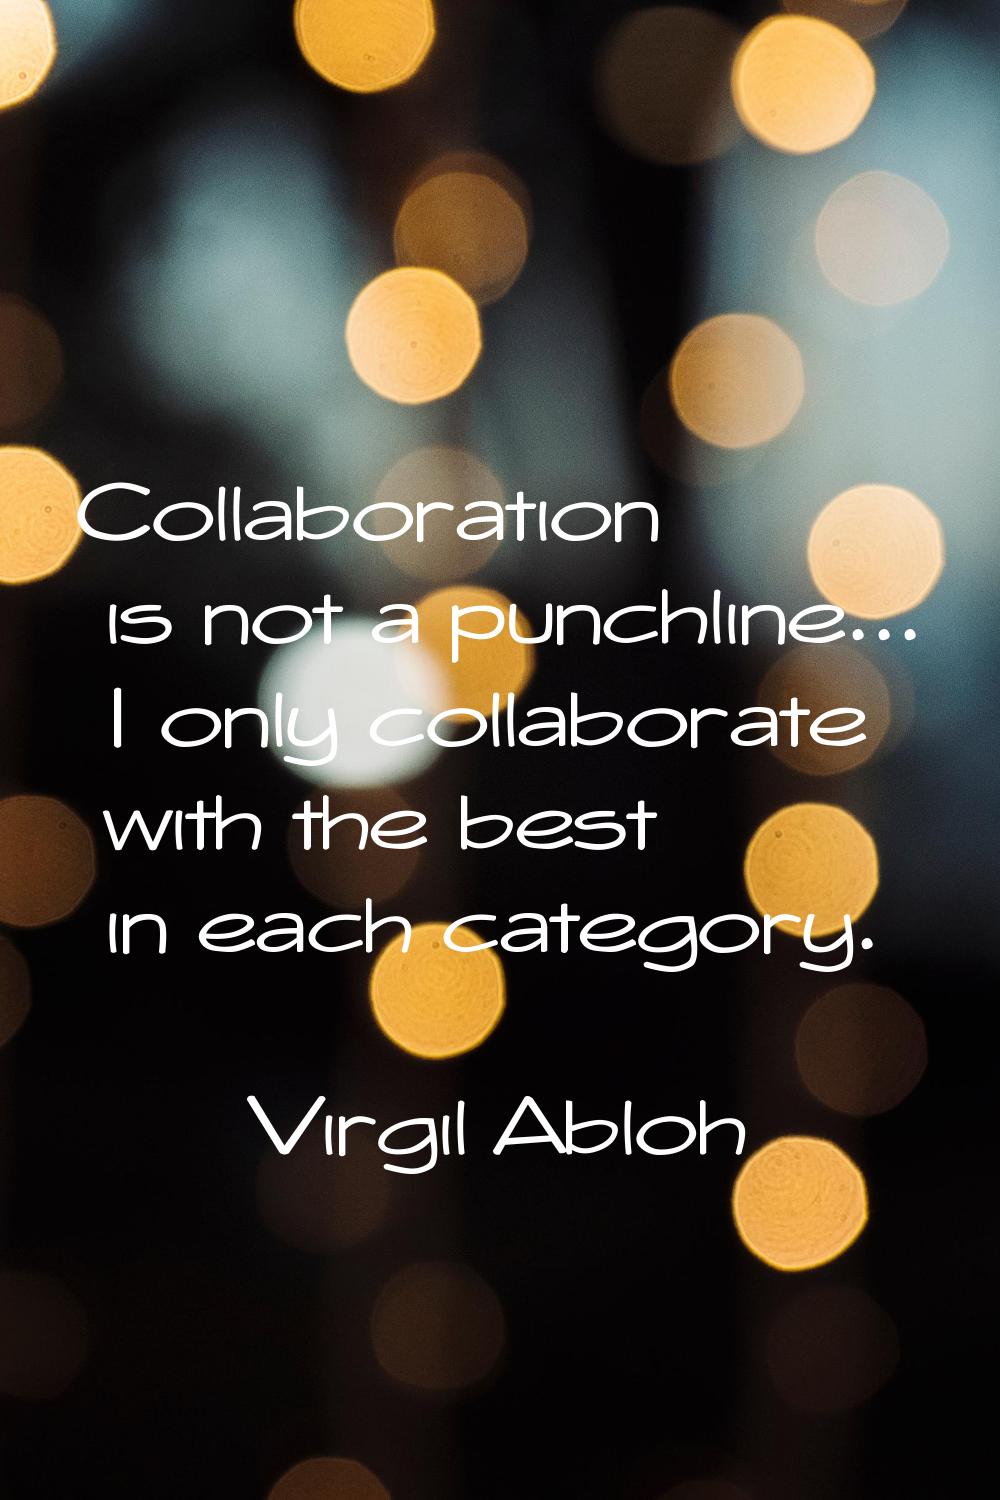 Collaboration is not a punchline... I only collaborate with the best in each category.